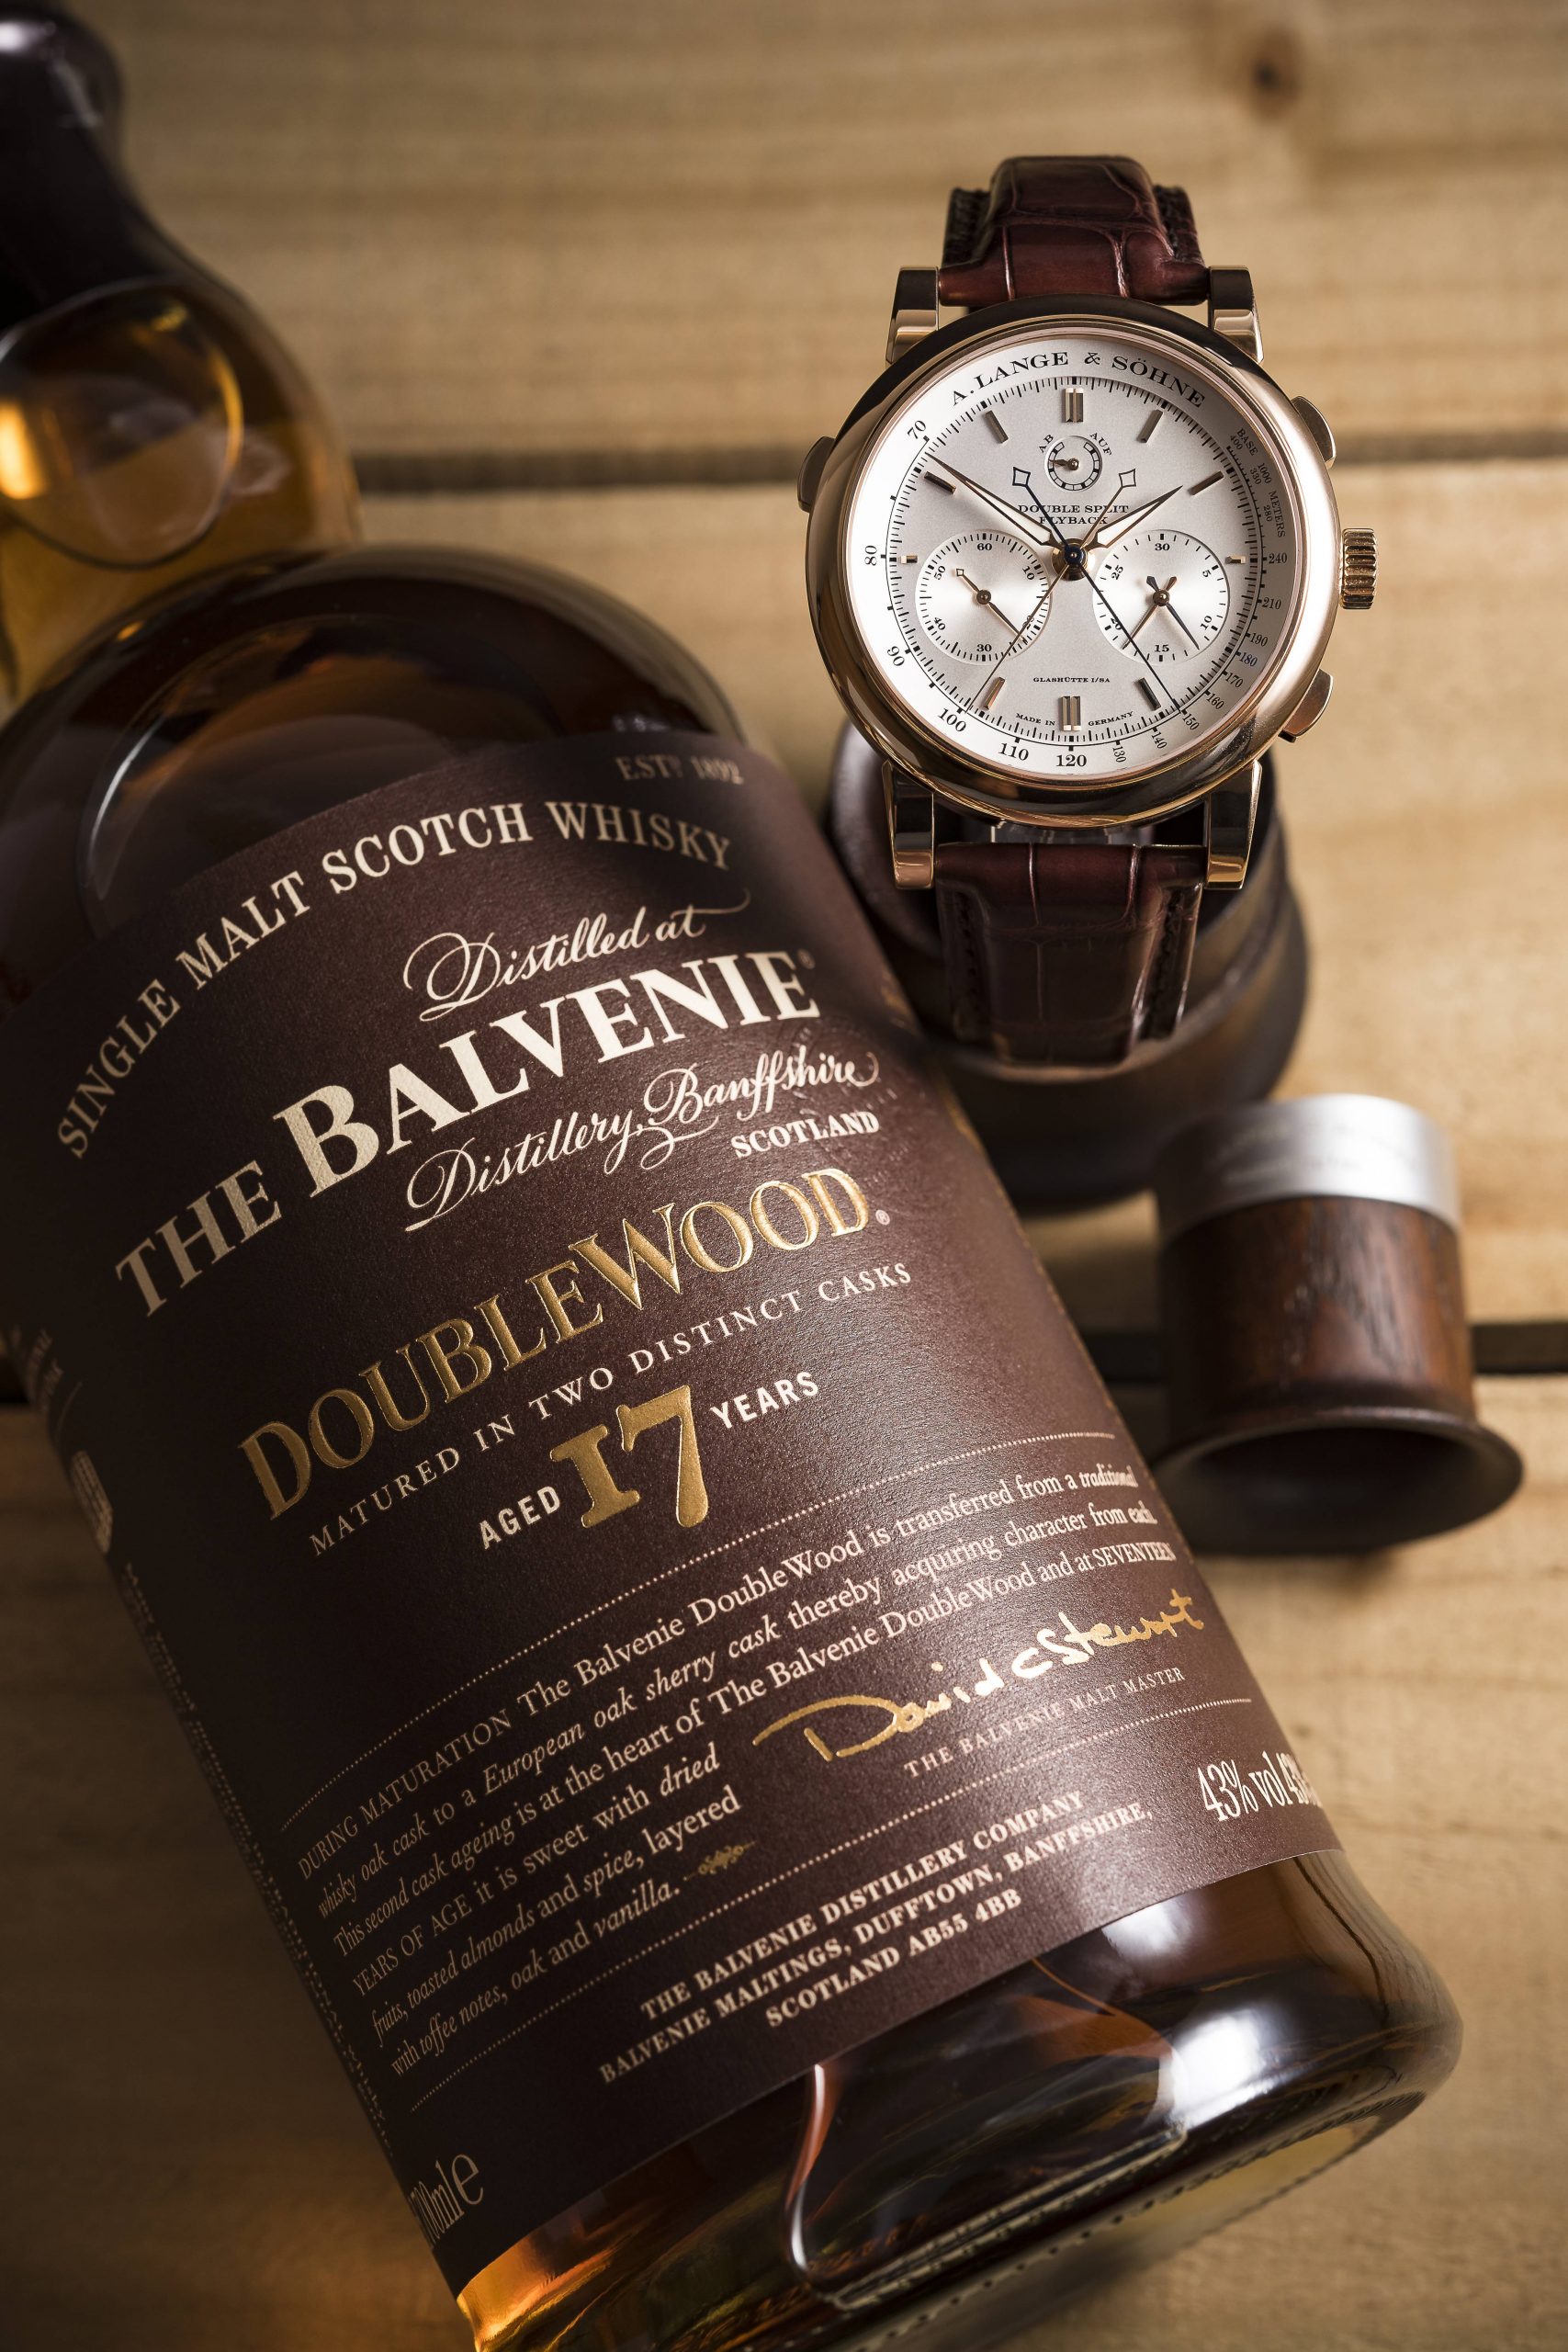 Watches And Whisky: A. Lange & Söhne And DoubleWood